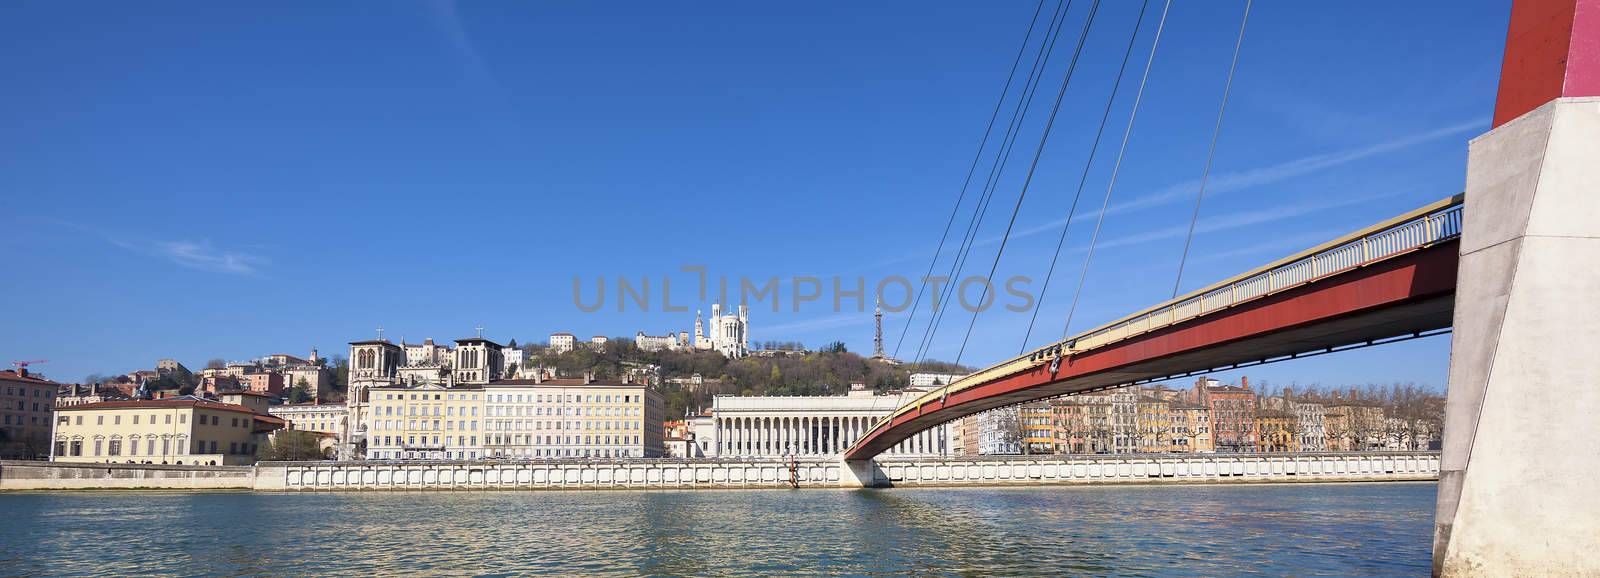 Saone river at Lyon with red footbridge by vwalakte